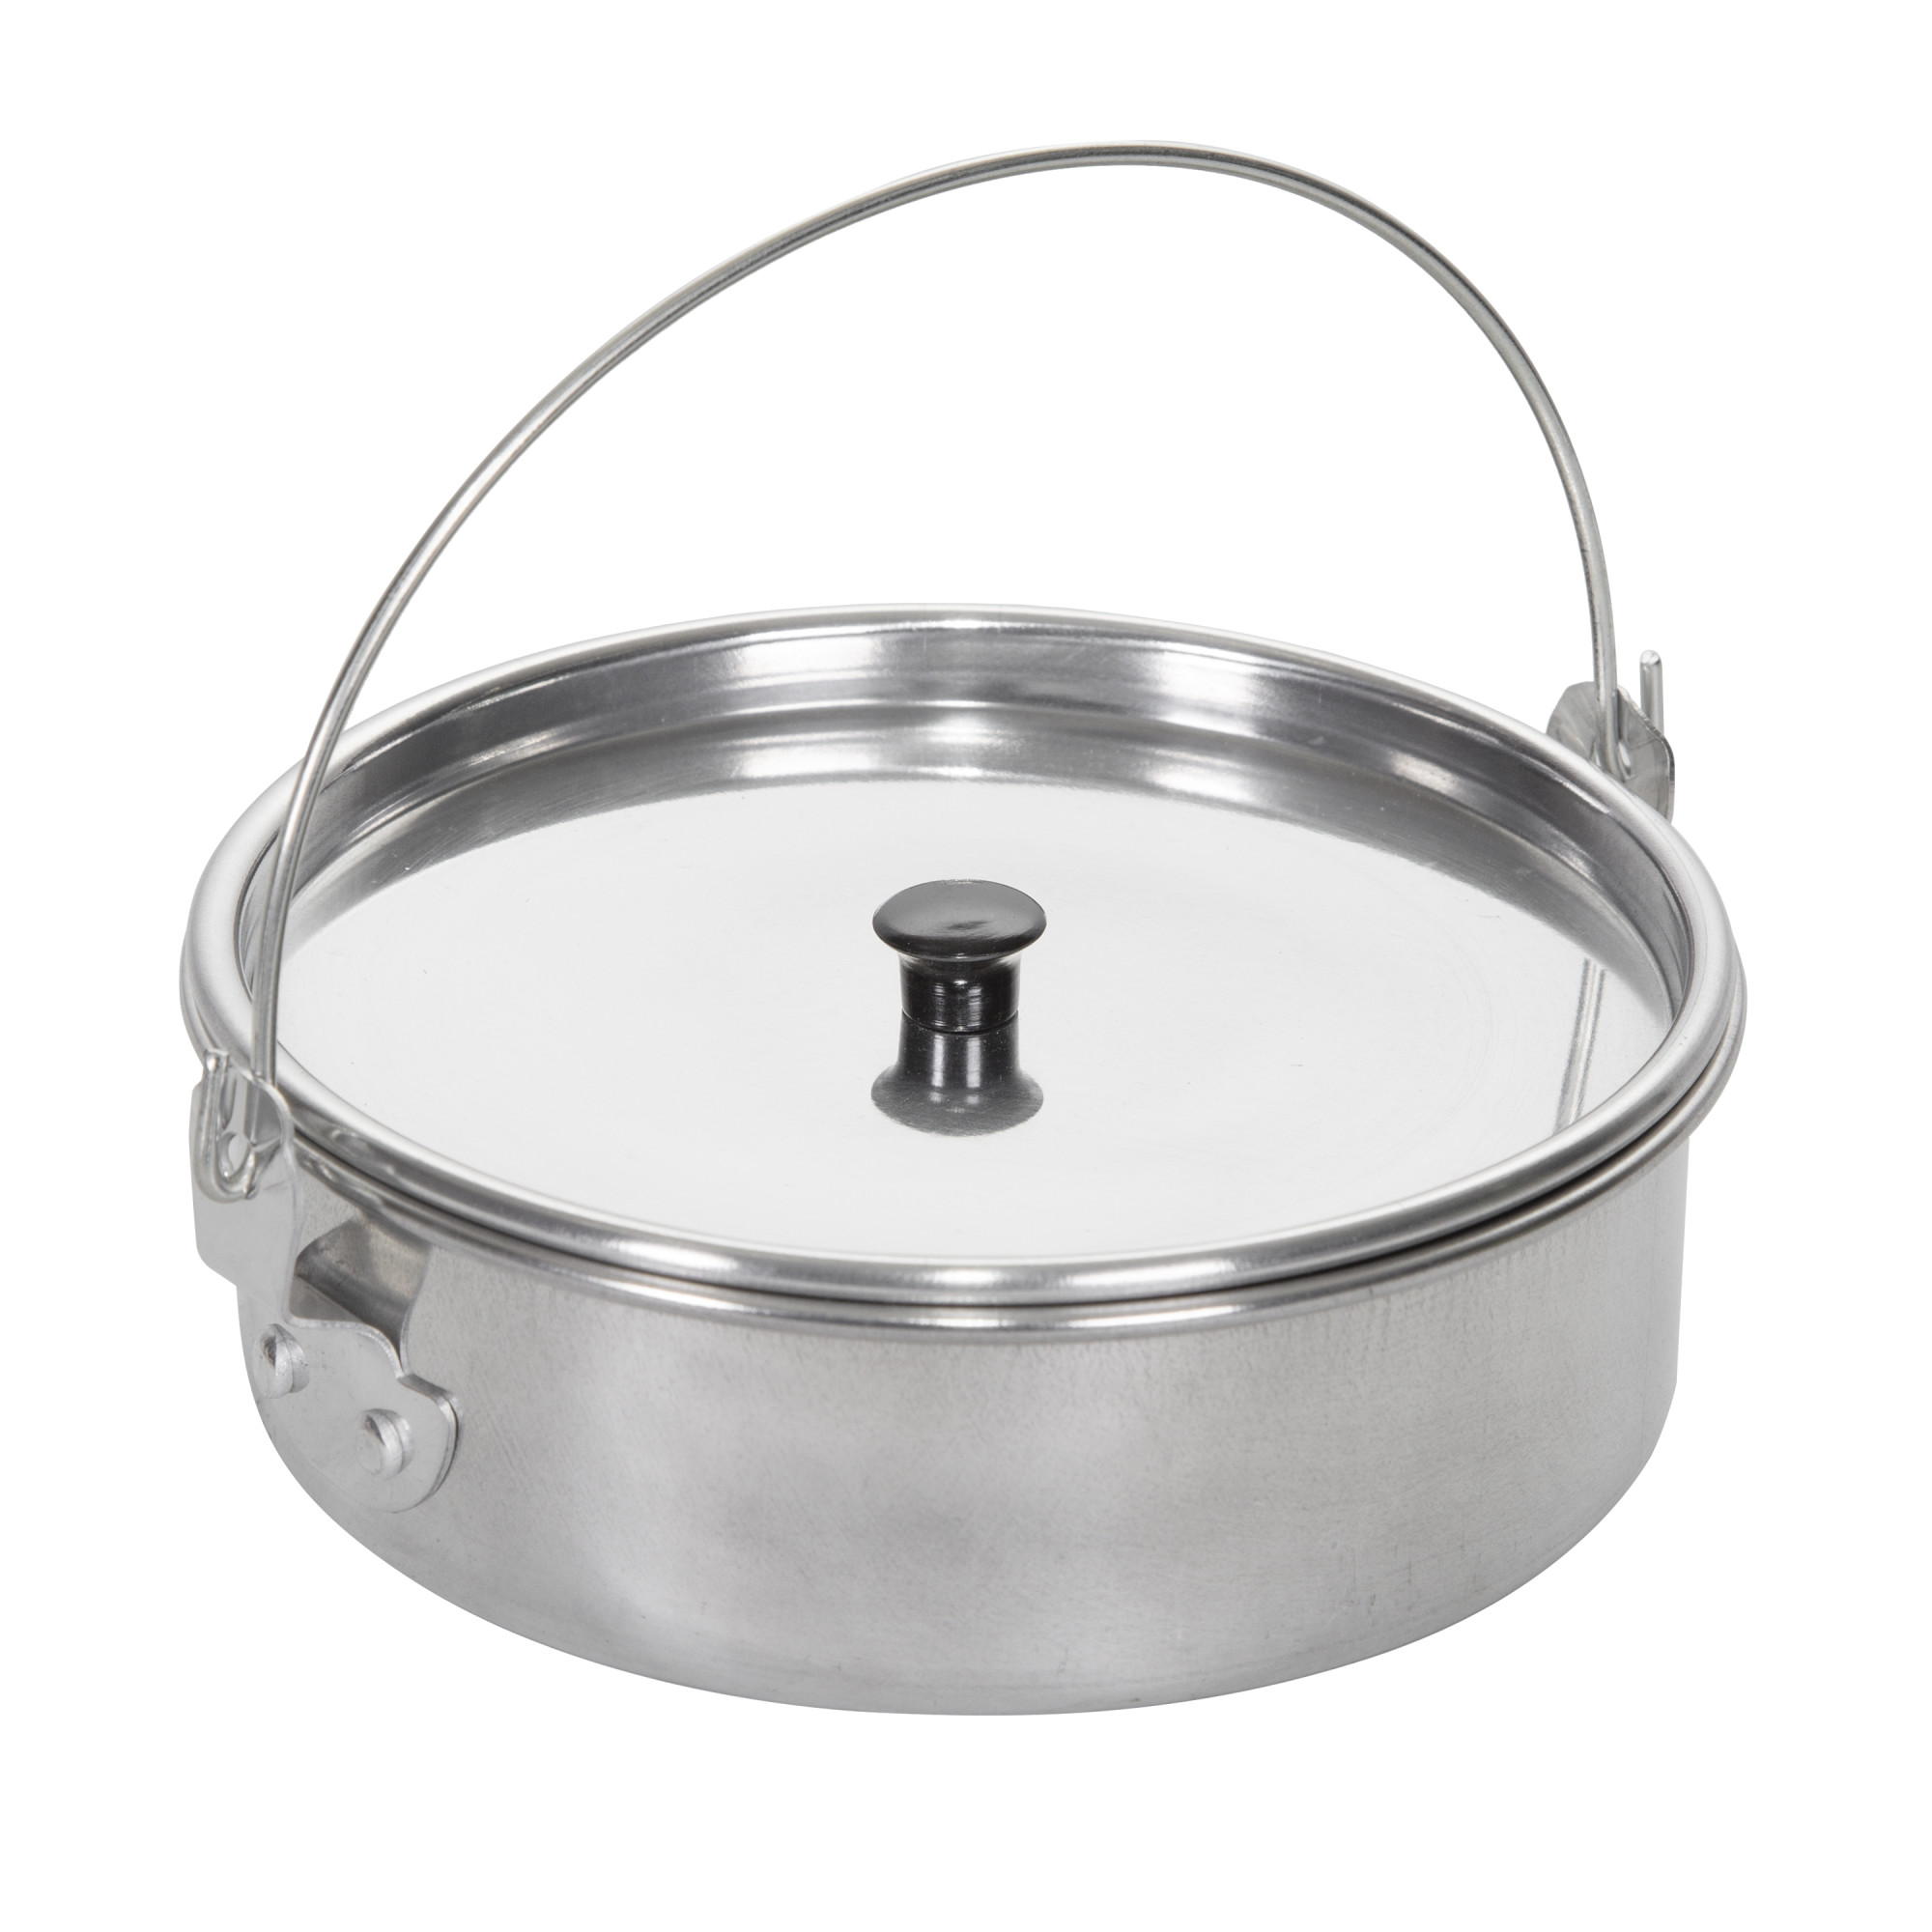 Stansport 1 Piece Aluminum Camping Mess Kit - image 3 of 10